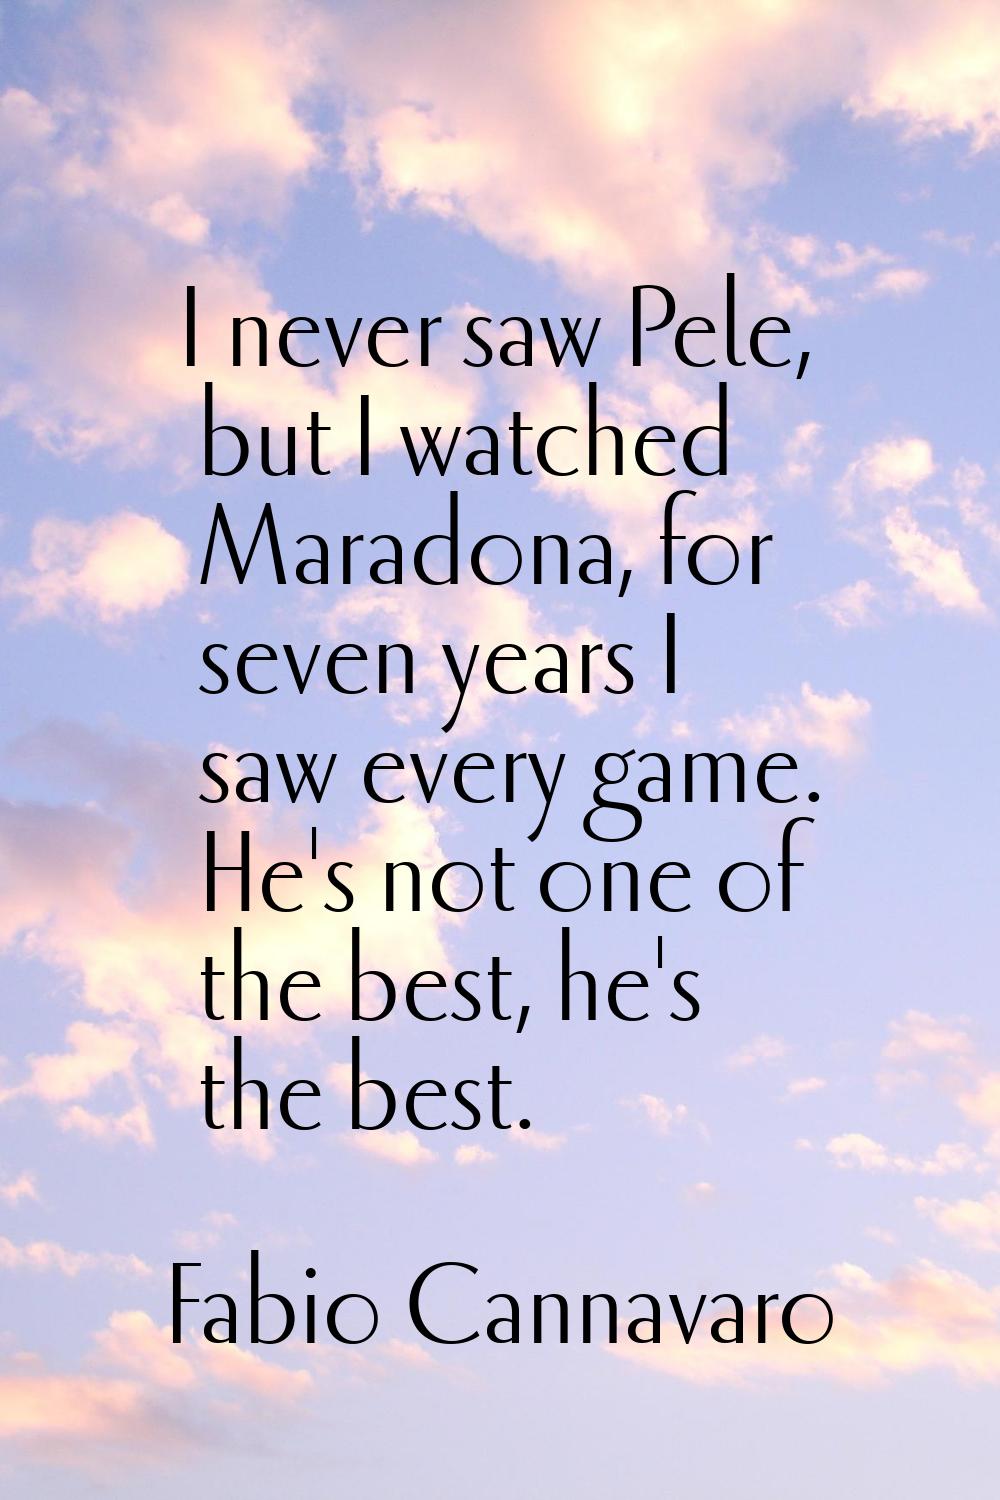 I never saw Pele, but I watched Maradona, for seven years I saw every game. He's not one of the bes